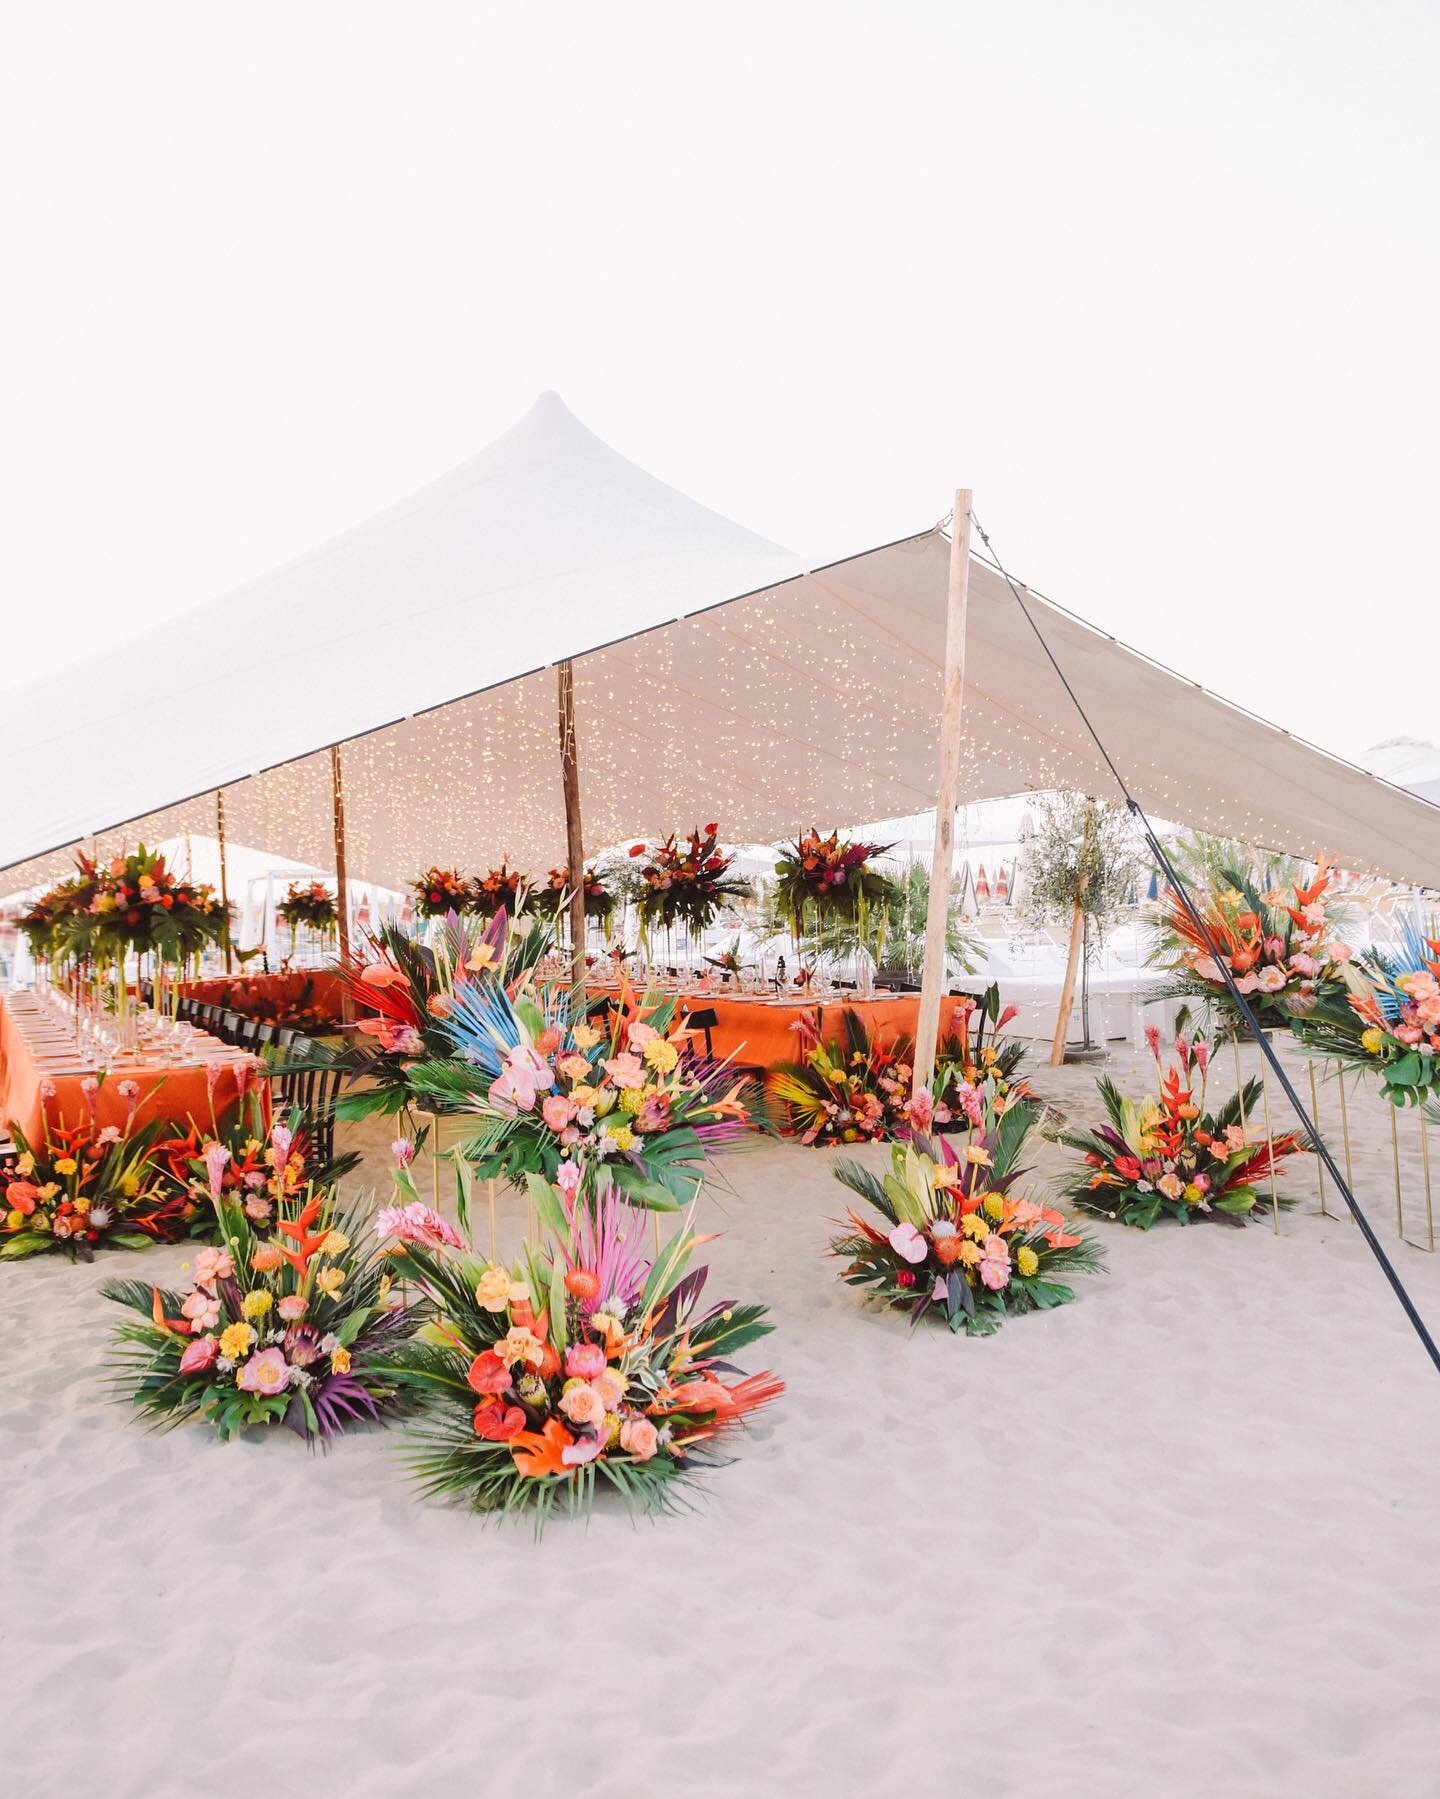 How to make your wedding reception unique? Vibrant tropical blooms, the beach breeze and a colorful table setting under a modern tepee as a perfect recipe for an unforgettable night! 

Wp: @chechic_weddings 
Video: @mircoeanisa 
Flowers: @whoiselenaf